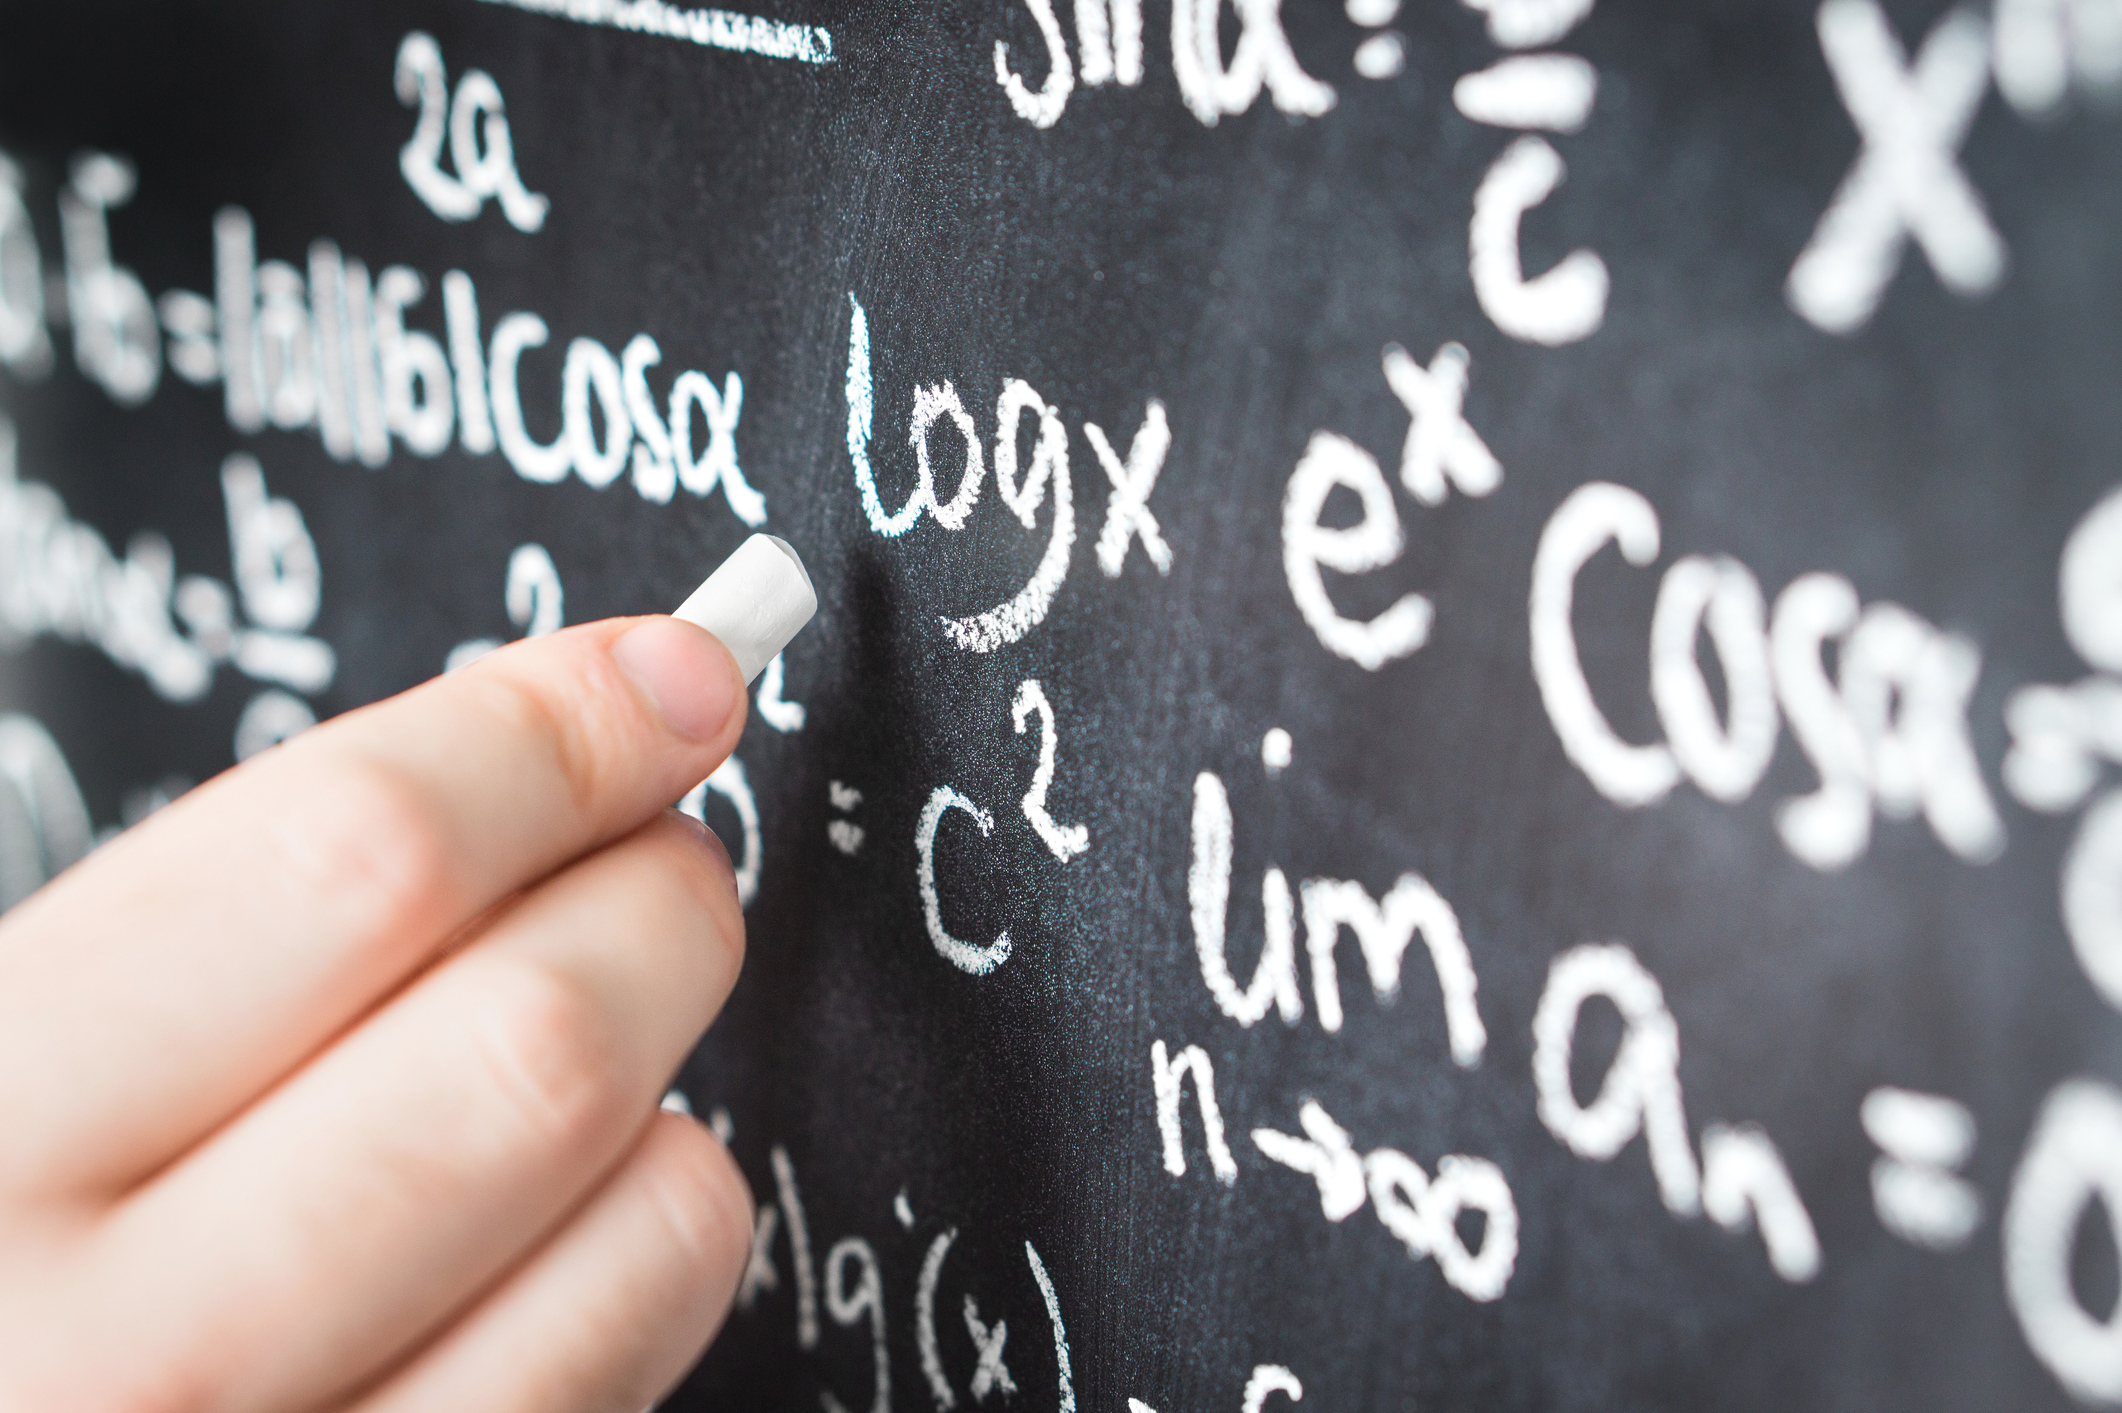 Professor writing mathematical formula and equation to blackboard in school classroom. College or university teacher or student with chalkboard. Science, education and math concept.